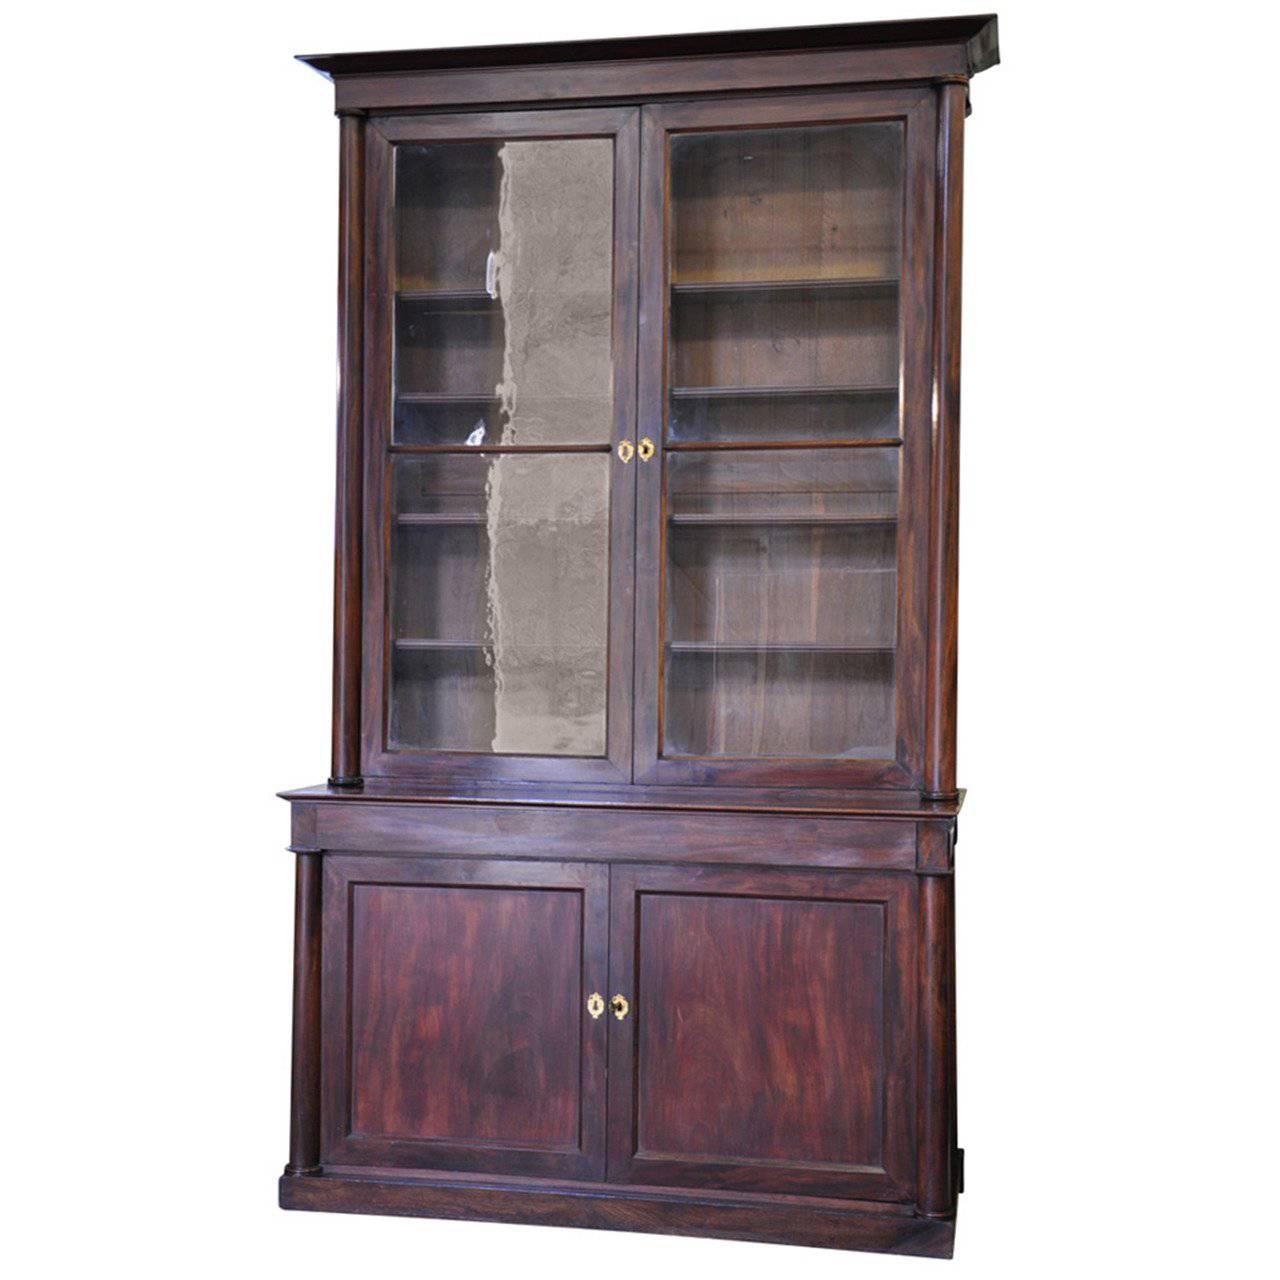 French Period Empire Glass Fronted Bookcase For Sale